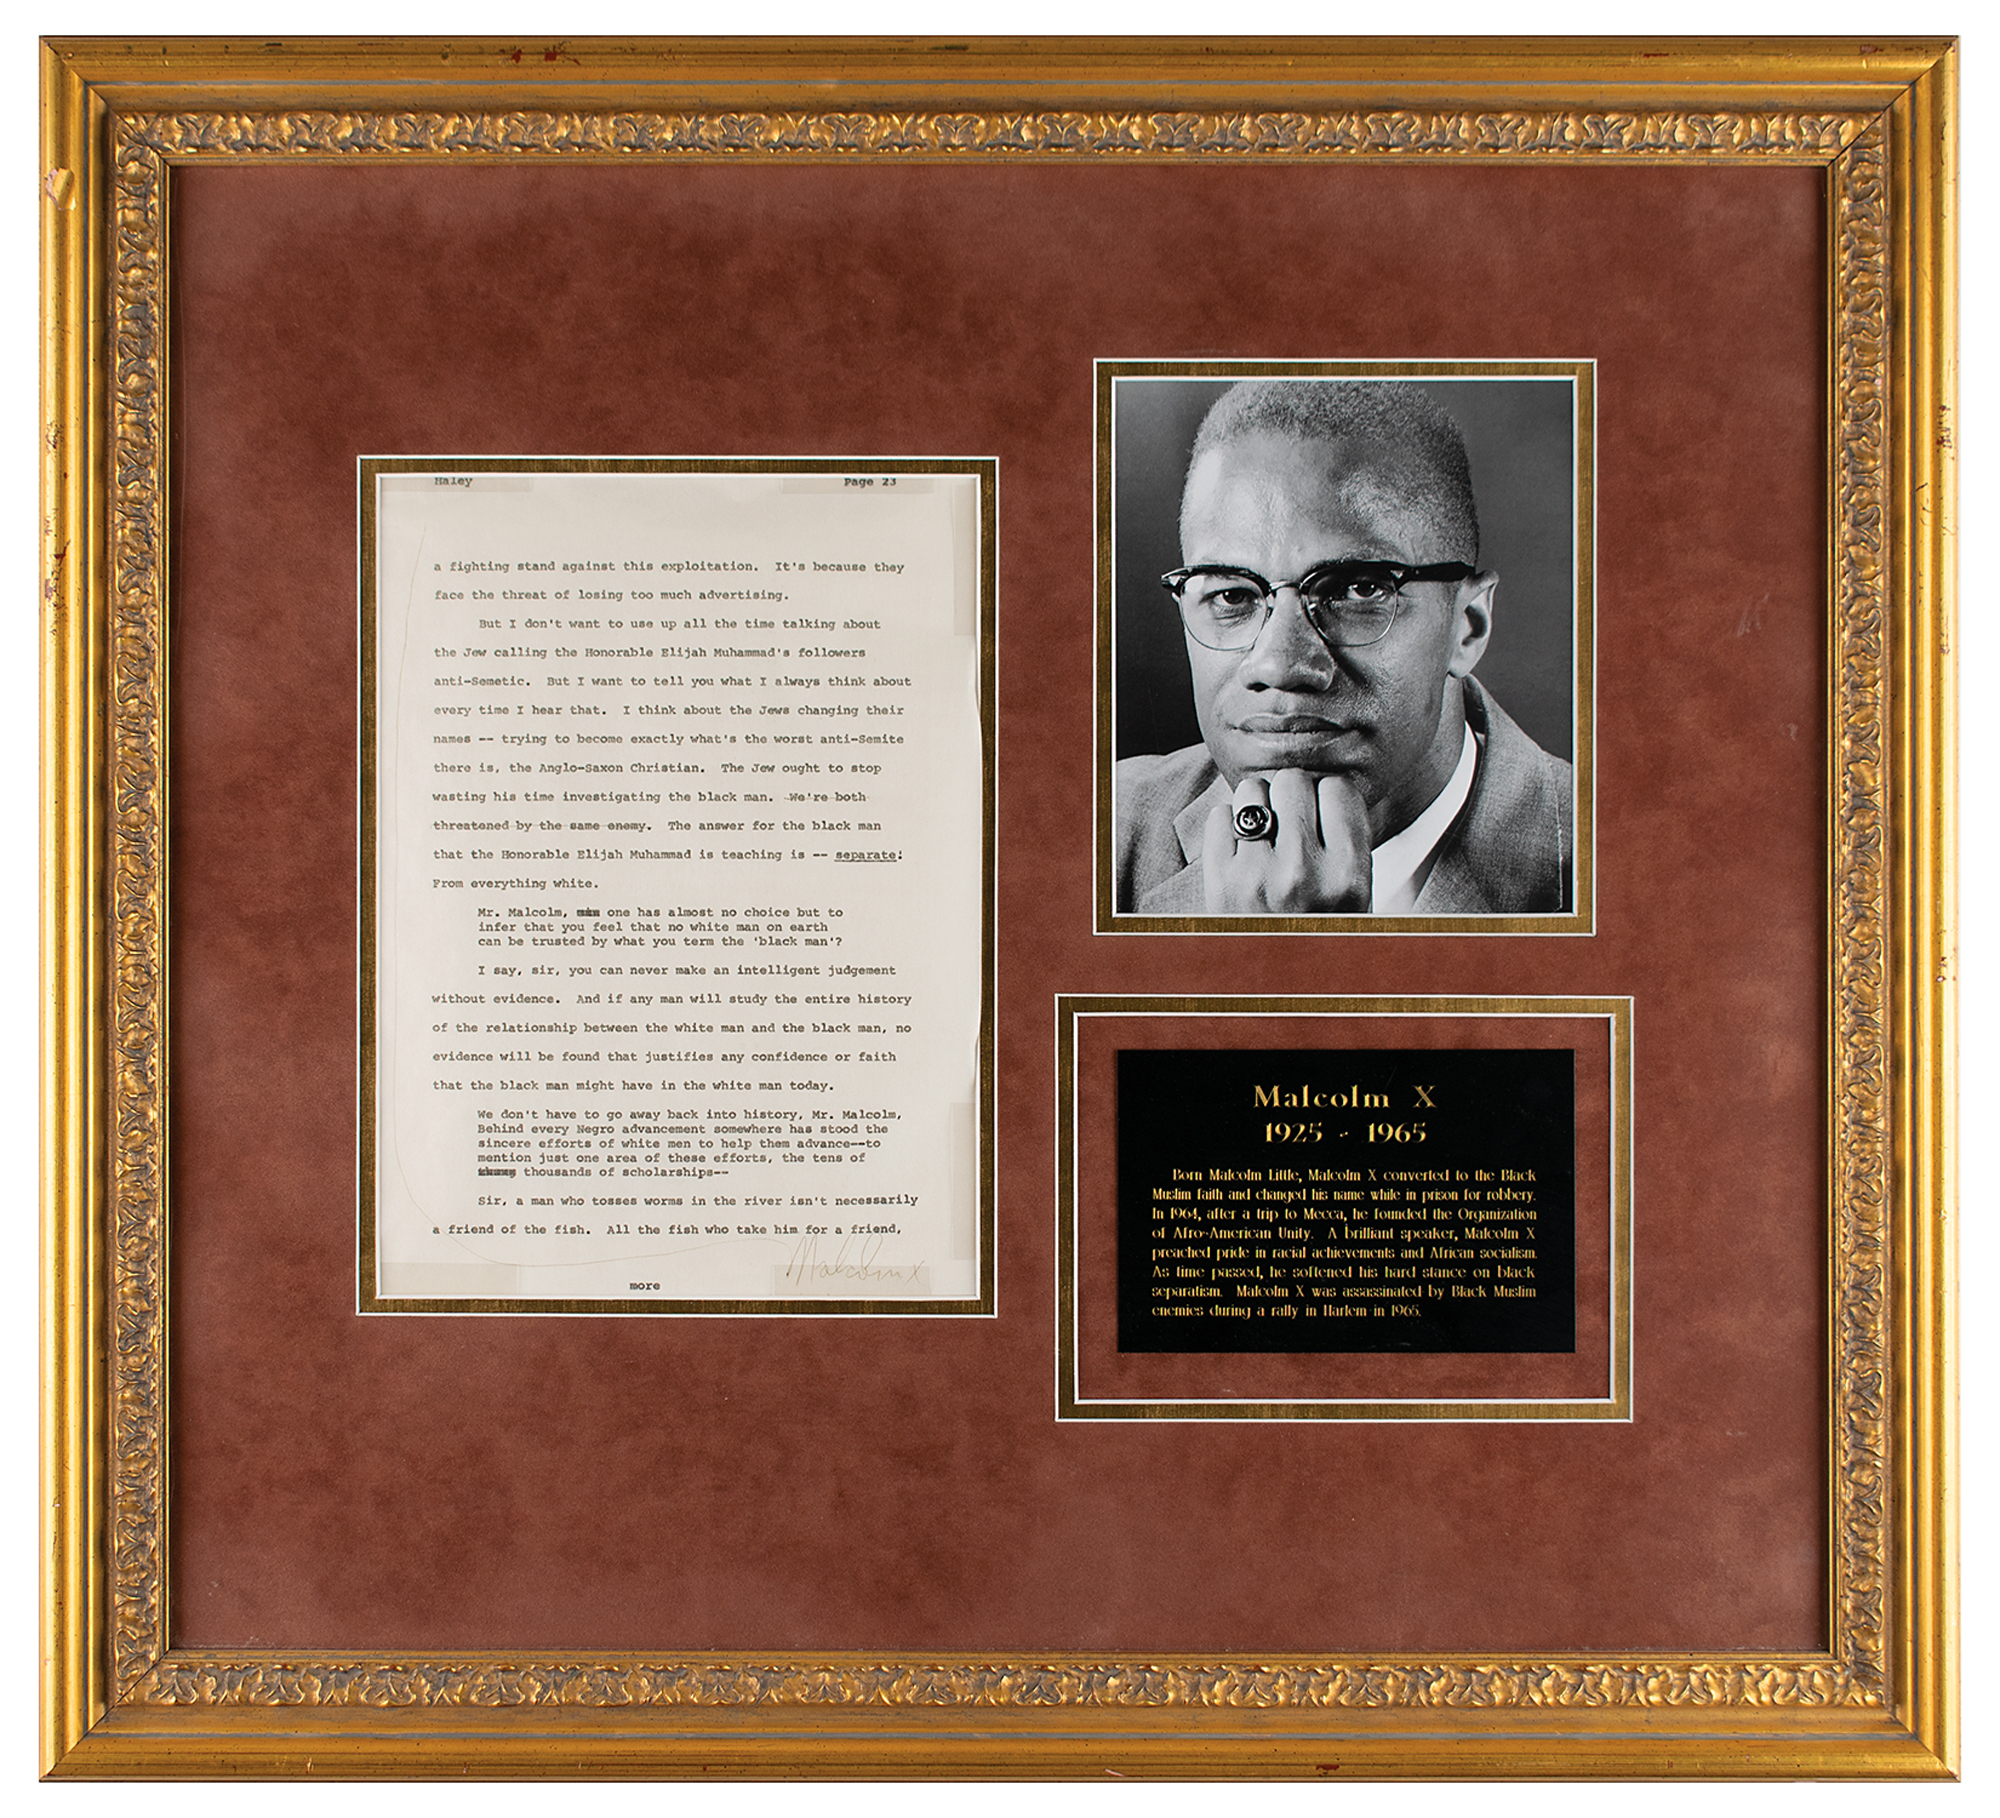 Lot #182 Malcolm X Signed Typescript Page for Alex Haley’s 1963 Playboy Interview